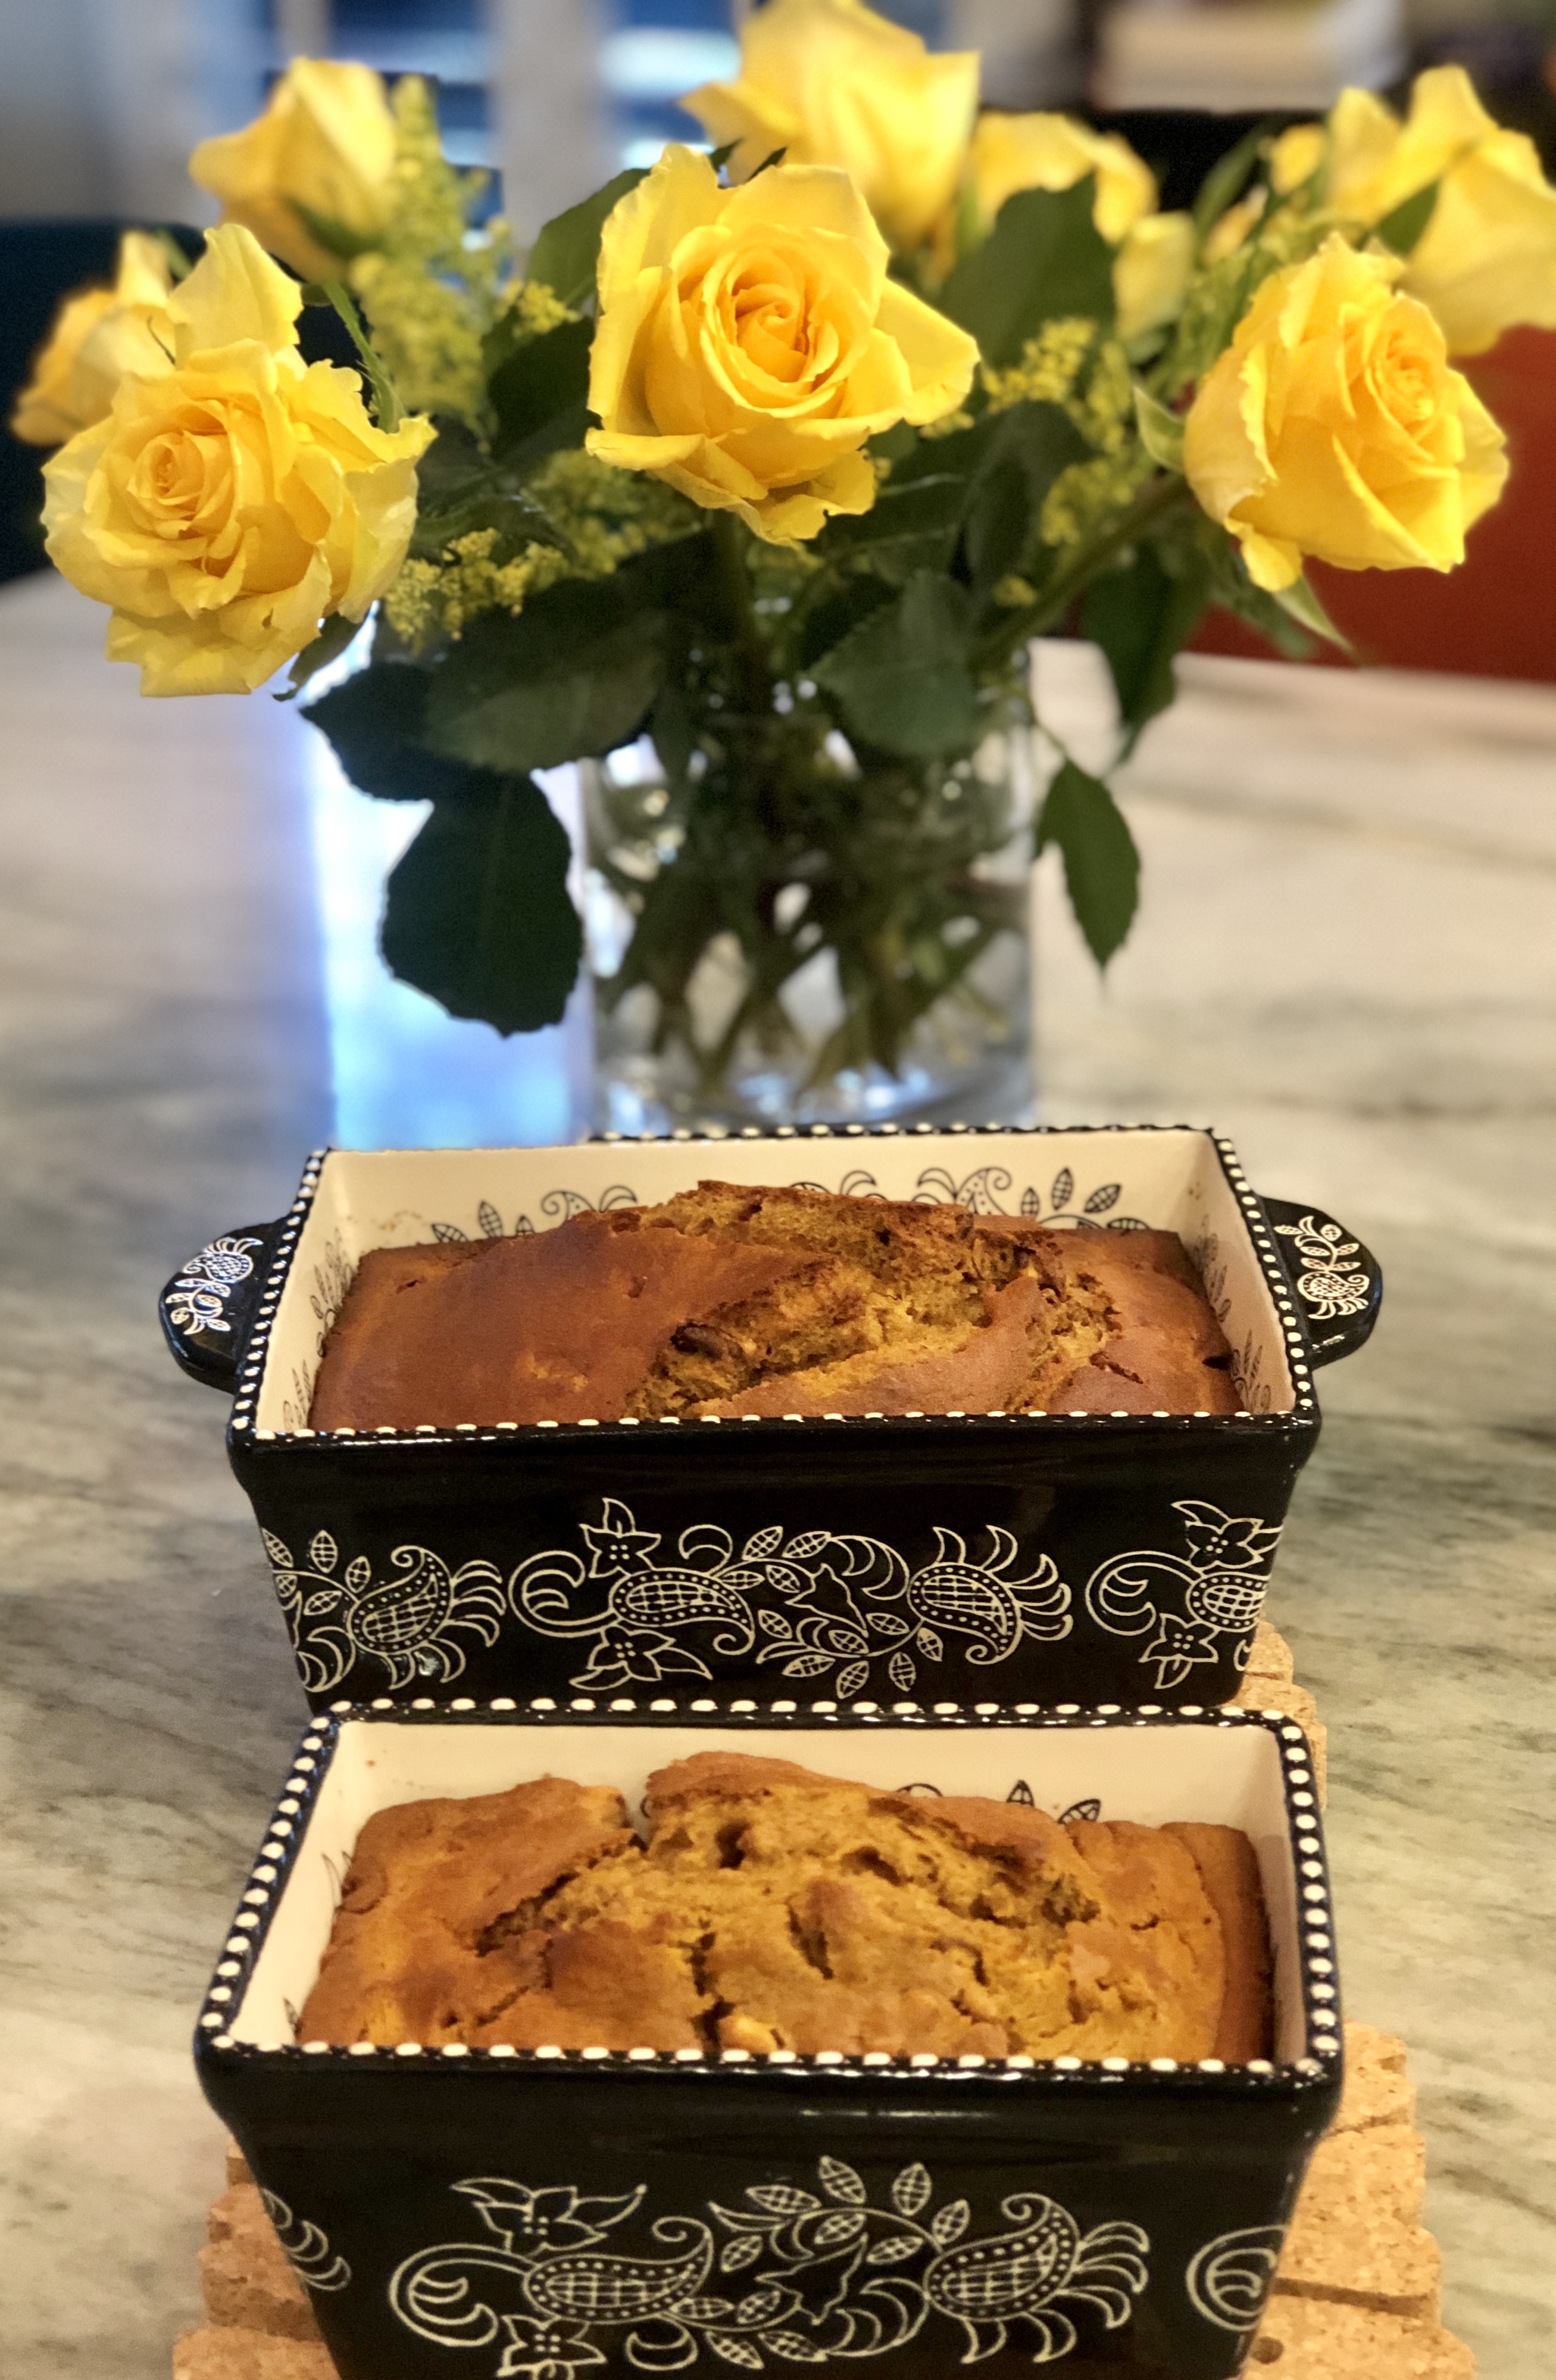 Vase with bright yellow roses and 2 loaves of golden brown pumpkin bread in Spanish style ceramic pans on Molé Mama's marble kitchen counter.